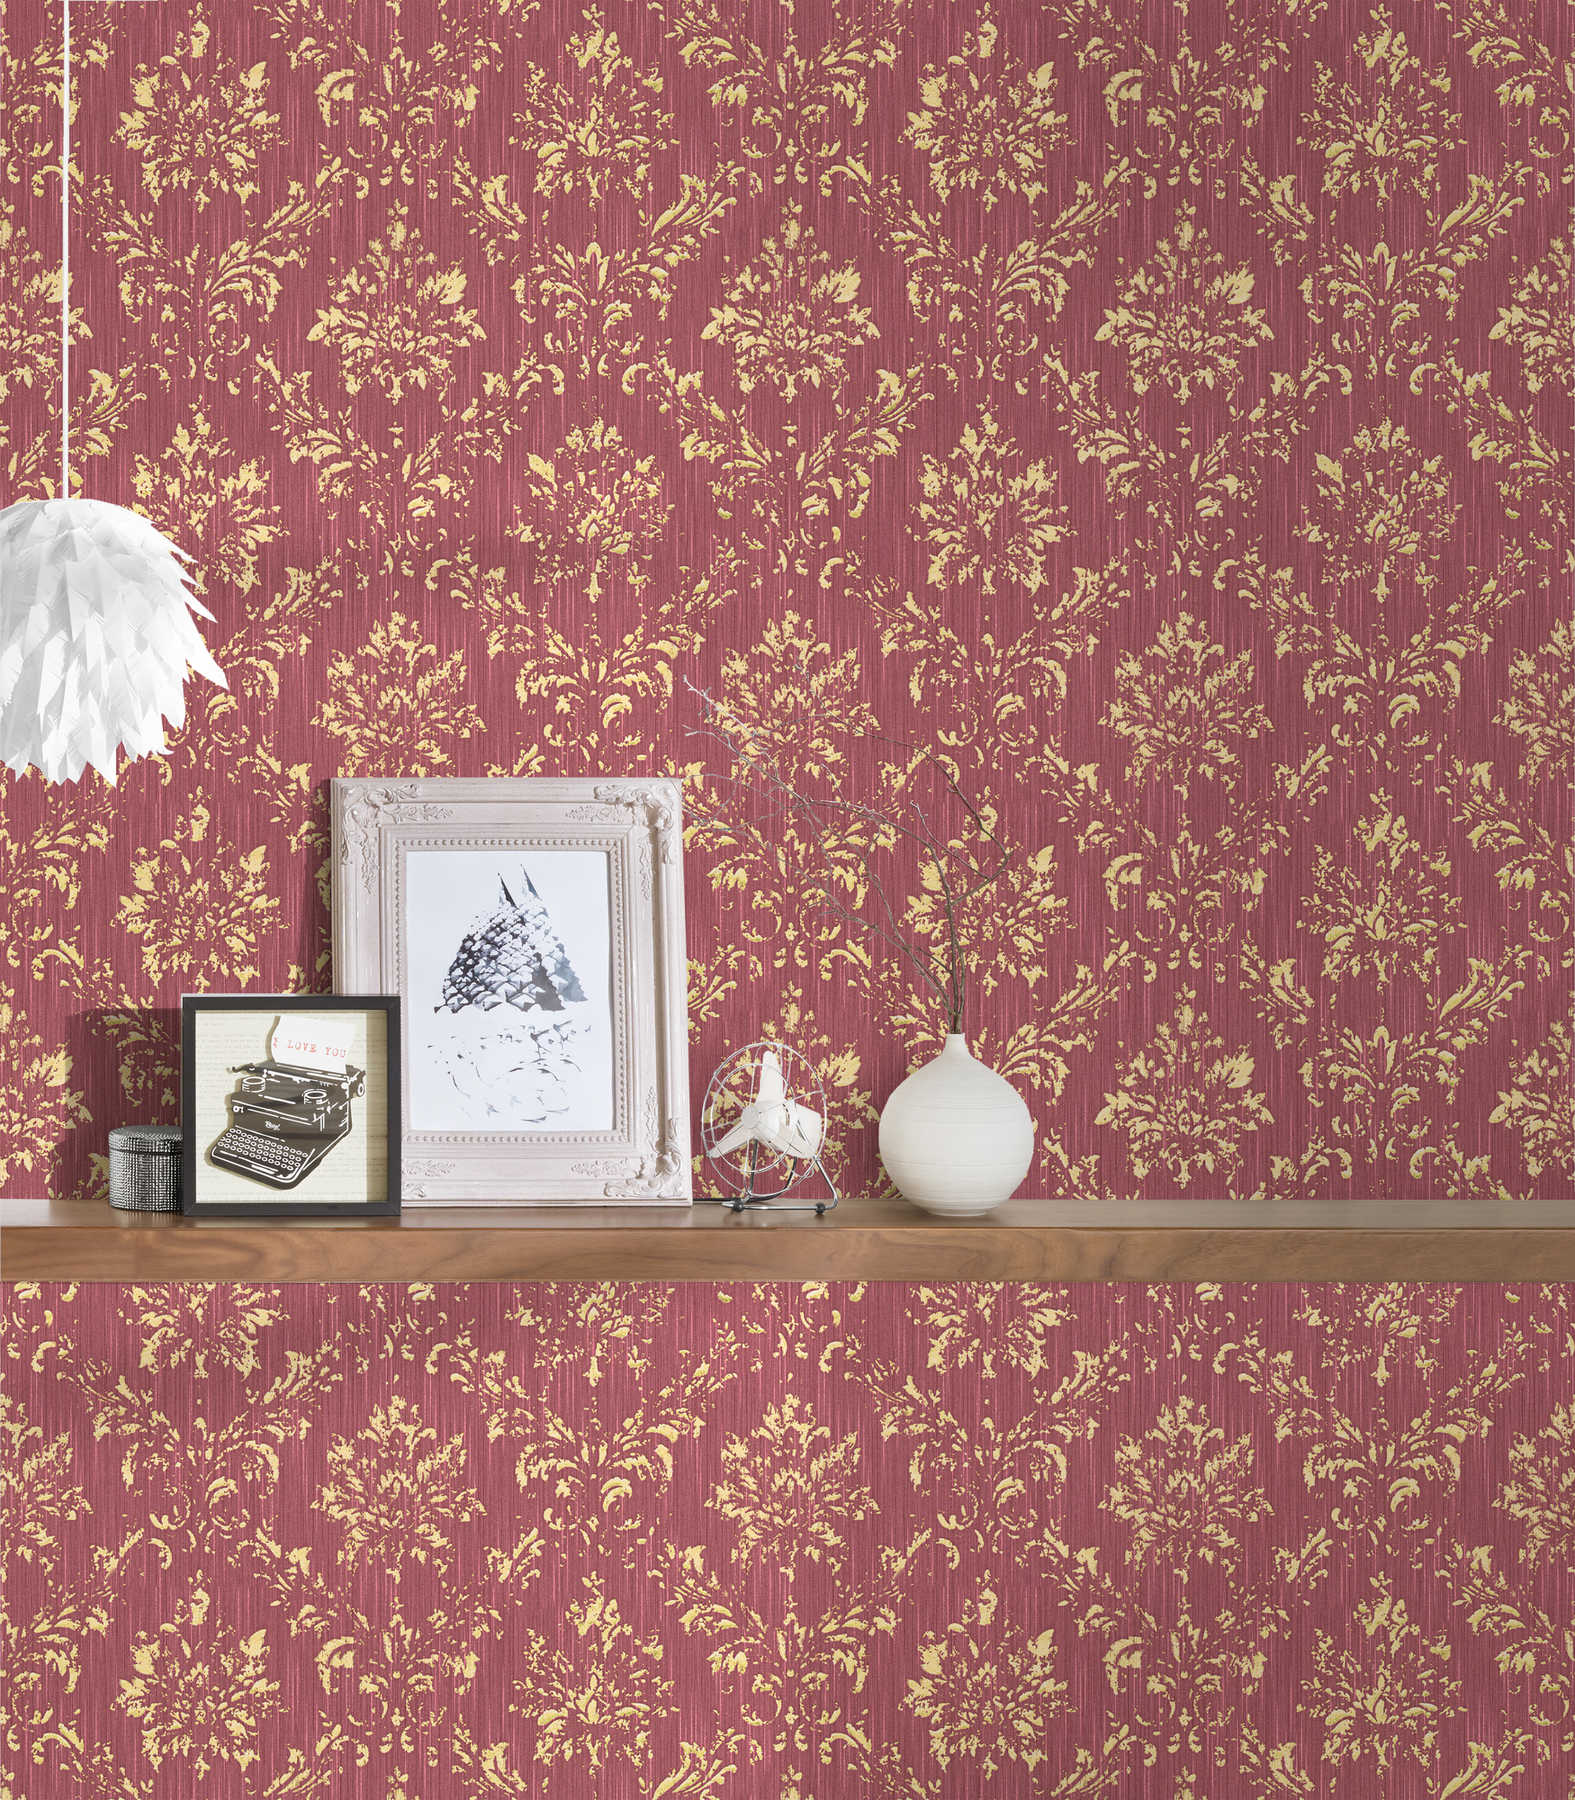             Wallpaper with gold ornaments in used look - red, gold
        